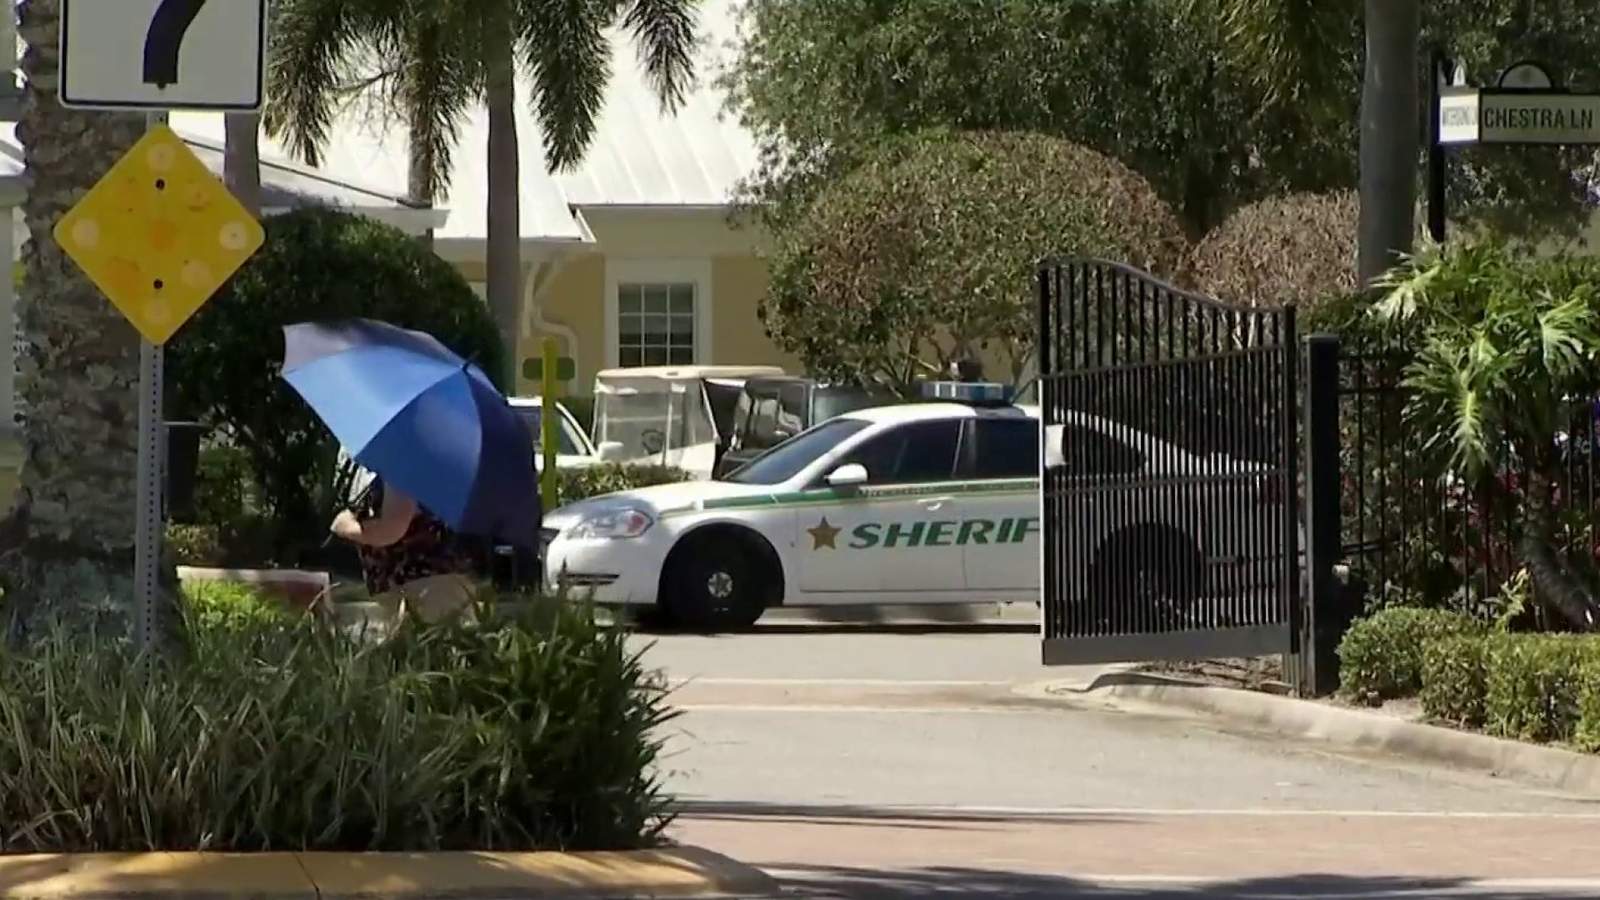 Brevard deputy fatally shoots man at assisted living facility in 'likely suicide-by-cop’ incident, sheriff says